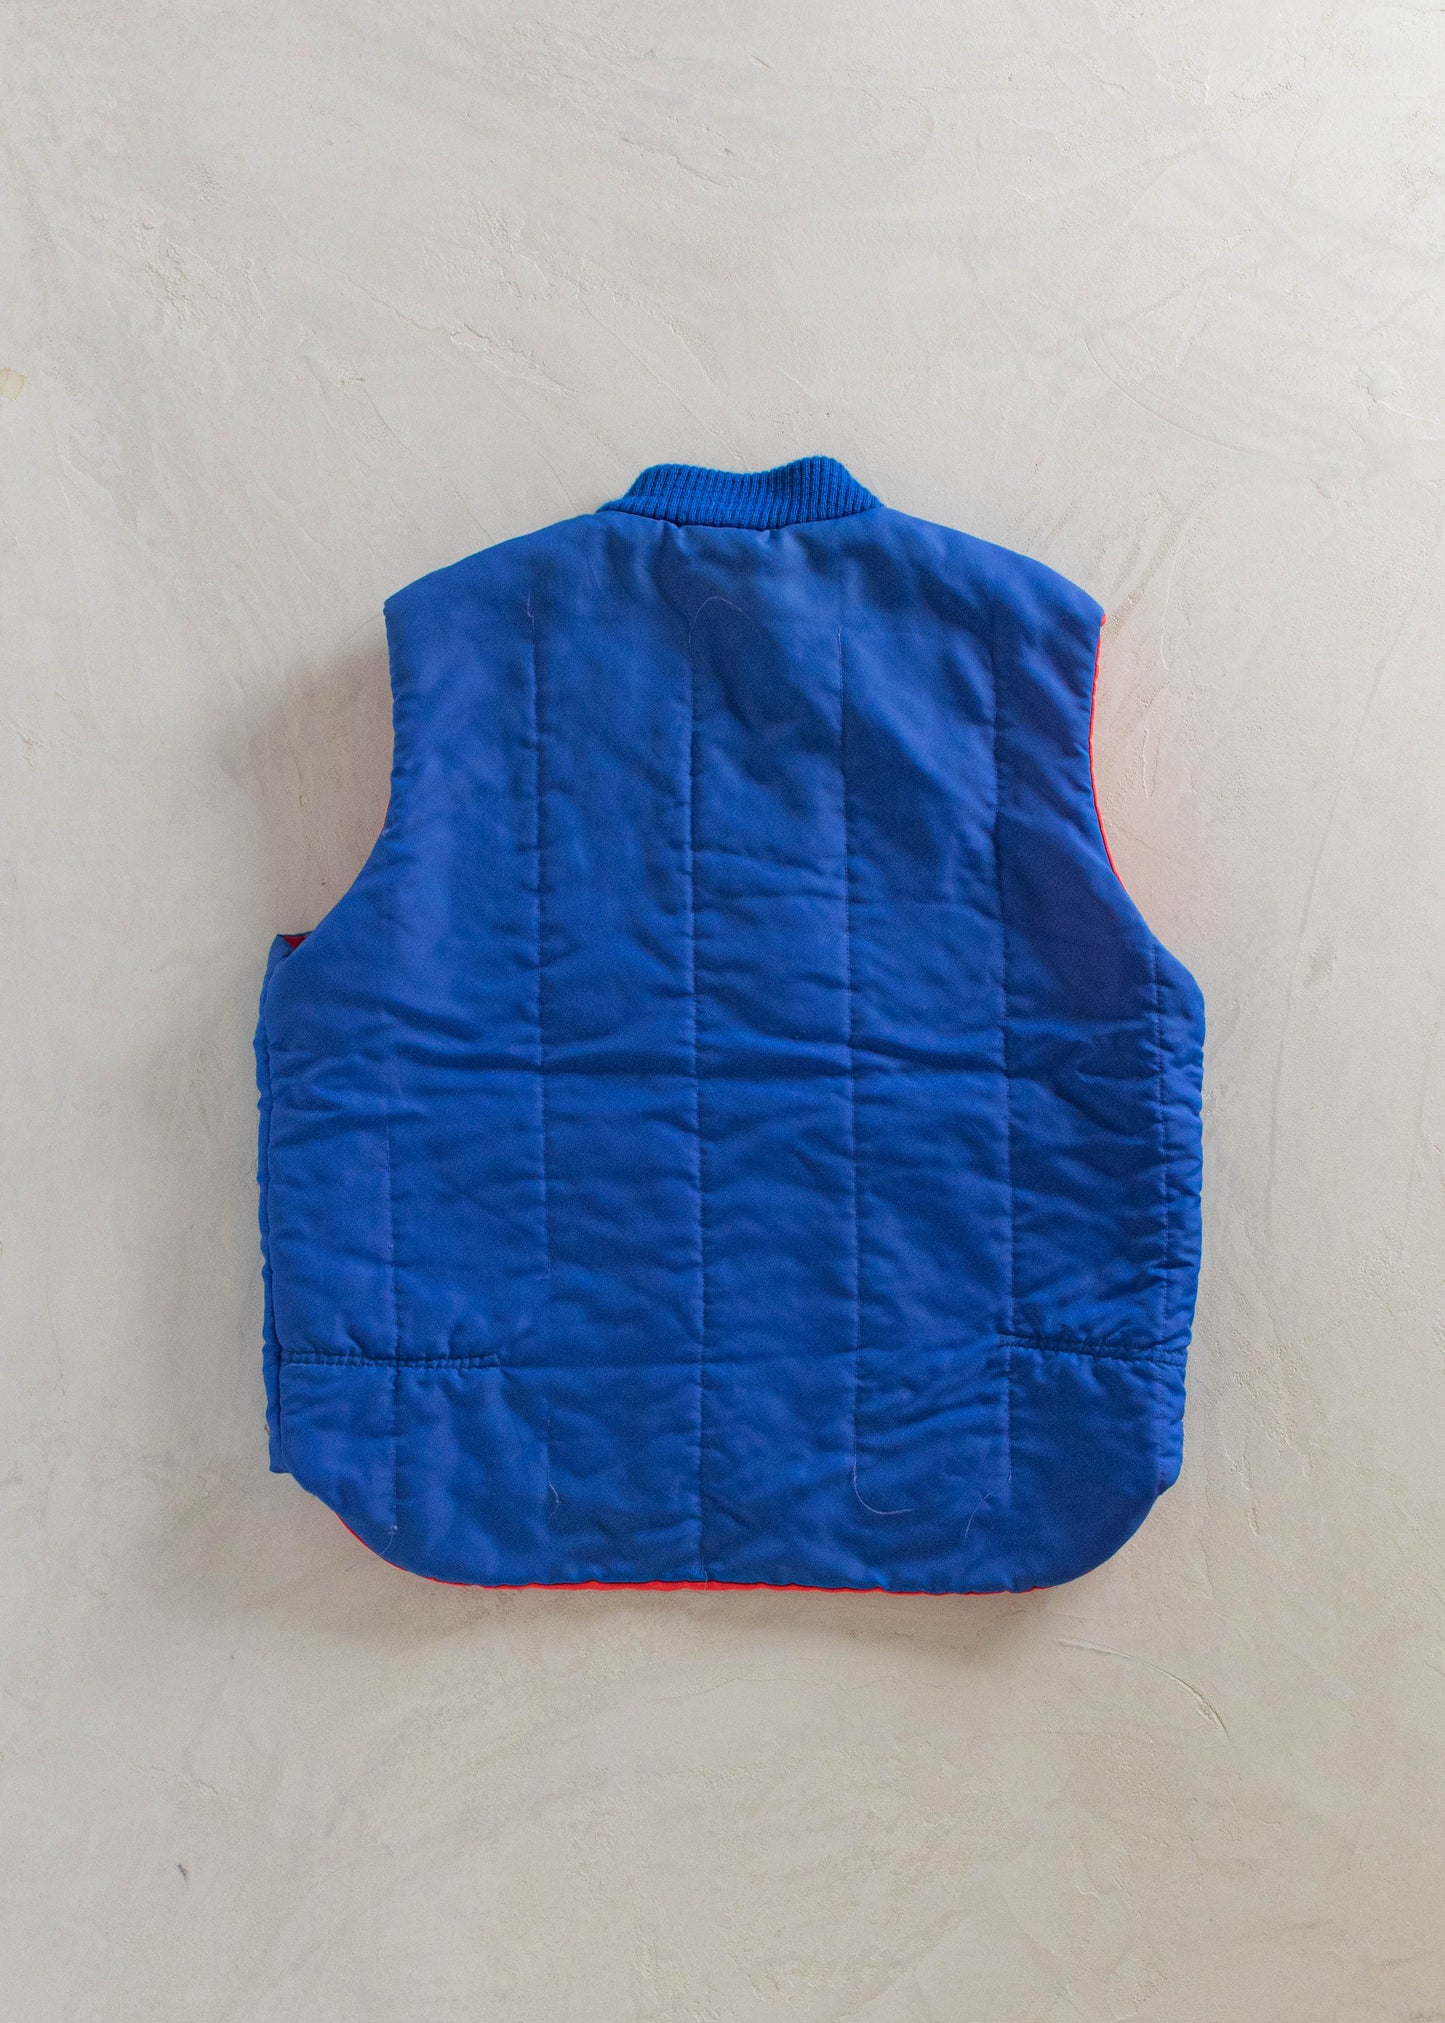 1990s Reversible Quilted Nylon Vest Size XL/2XL